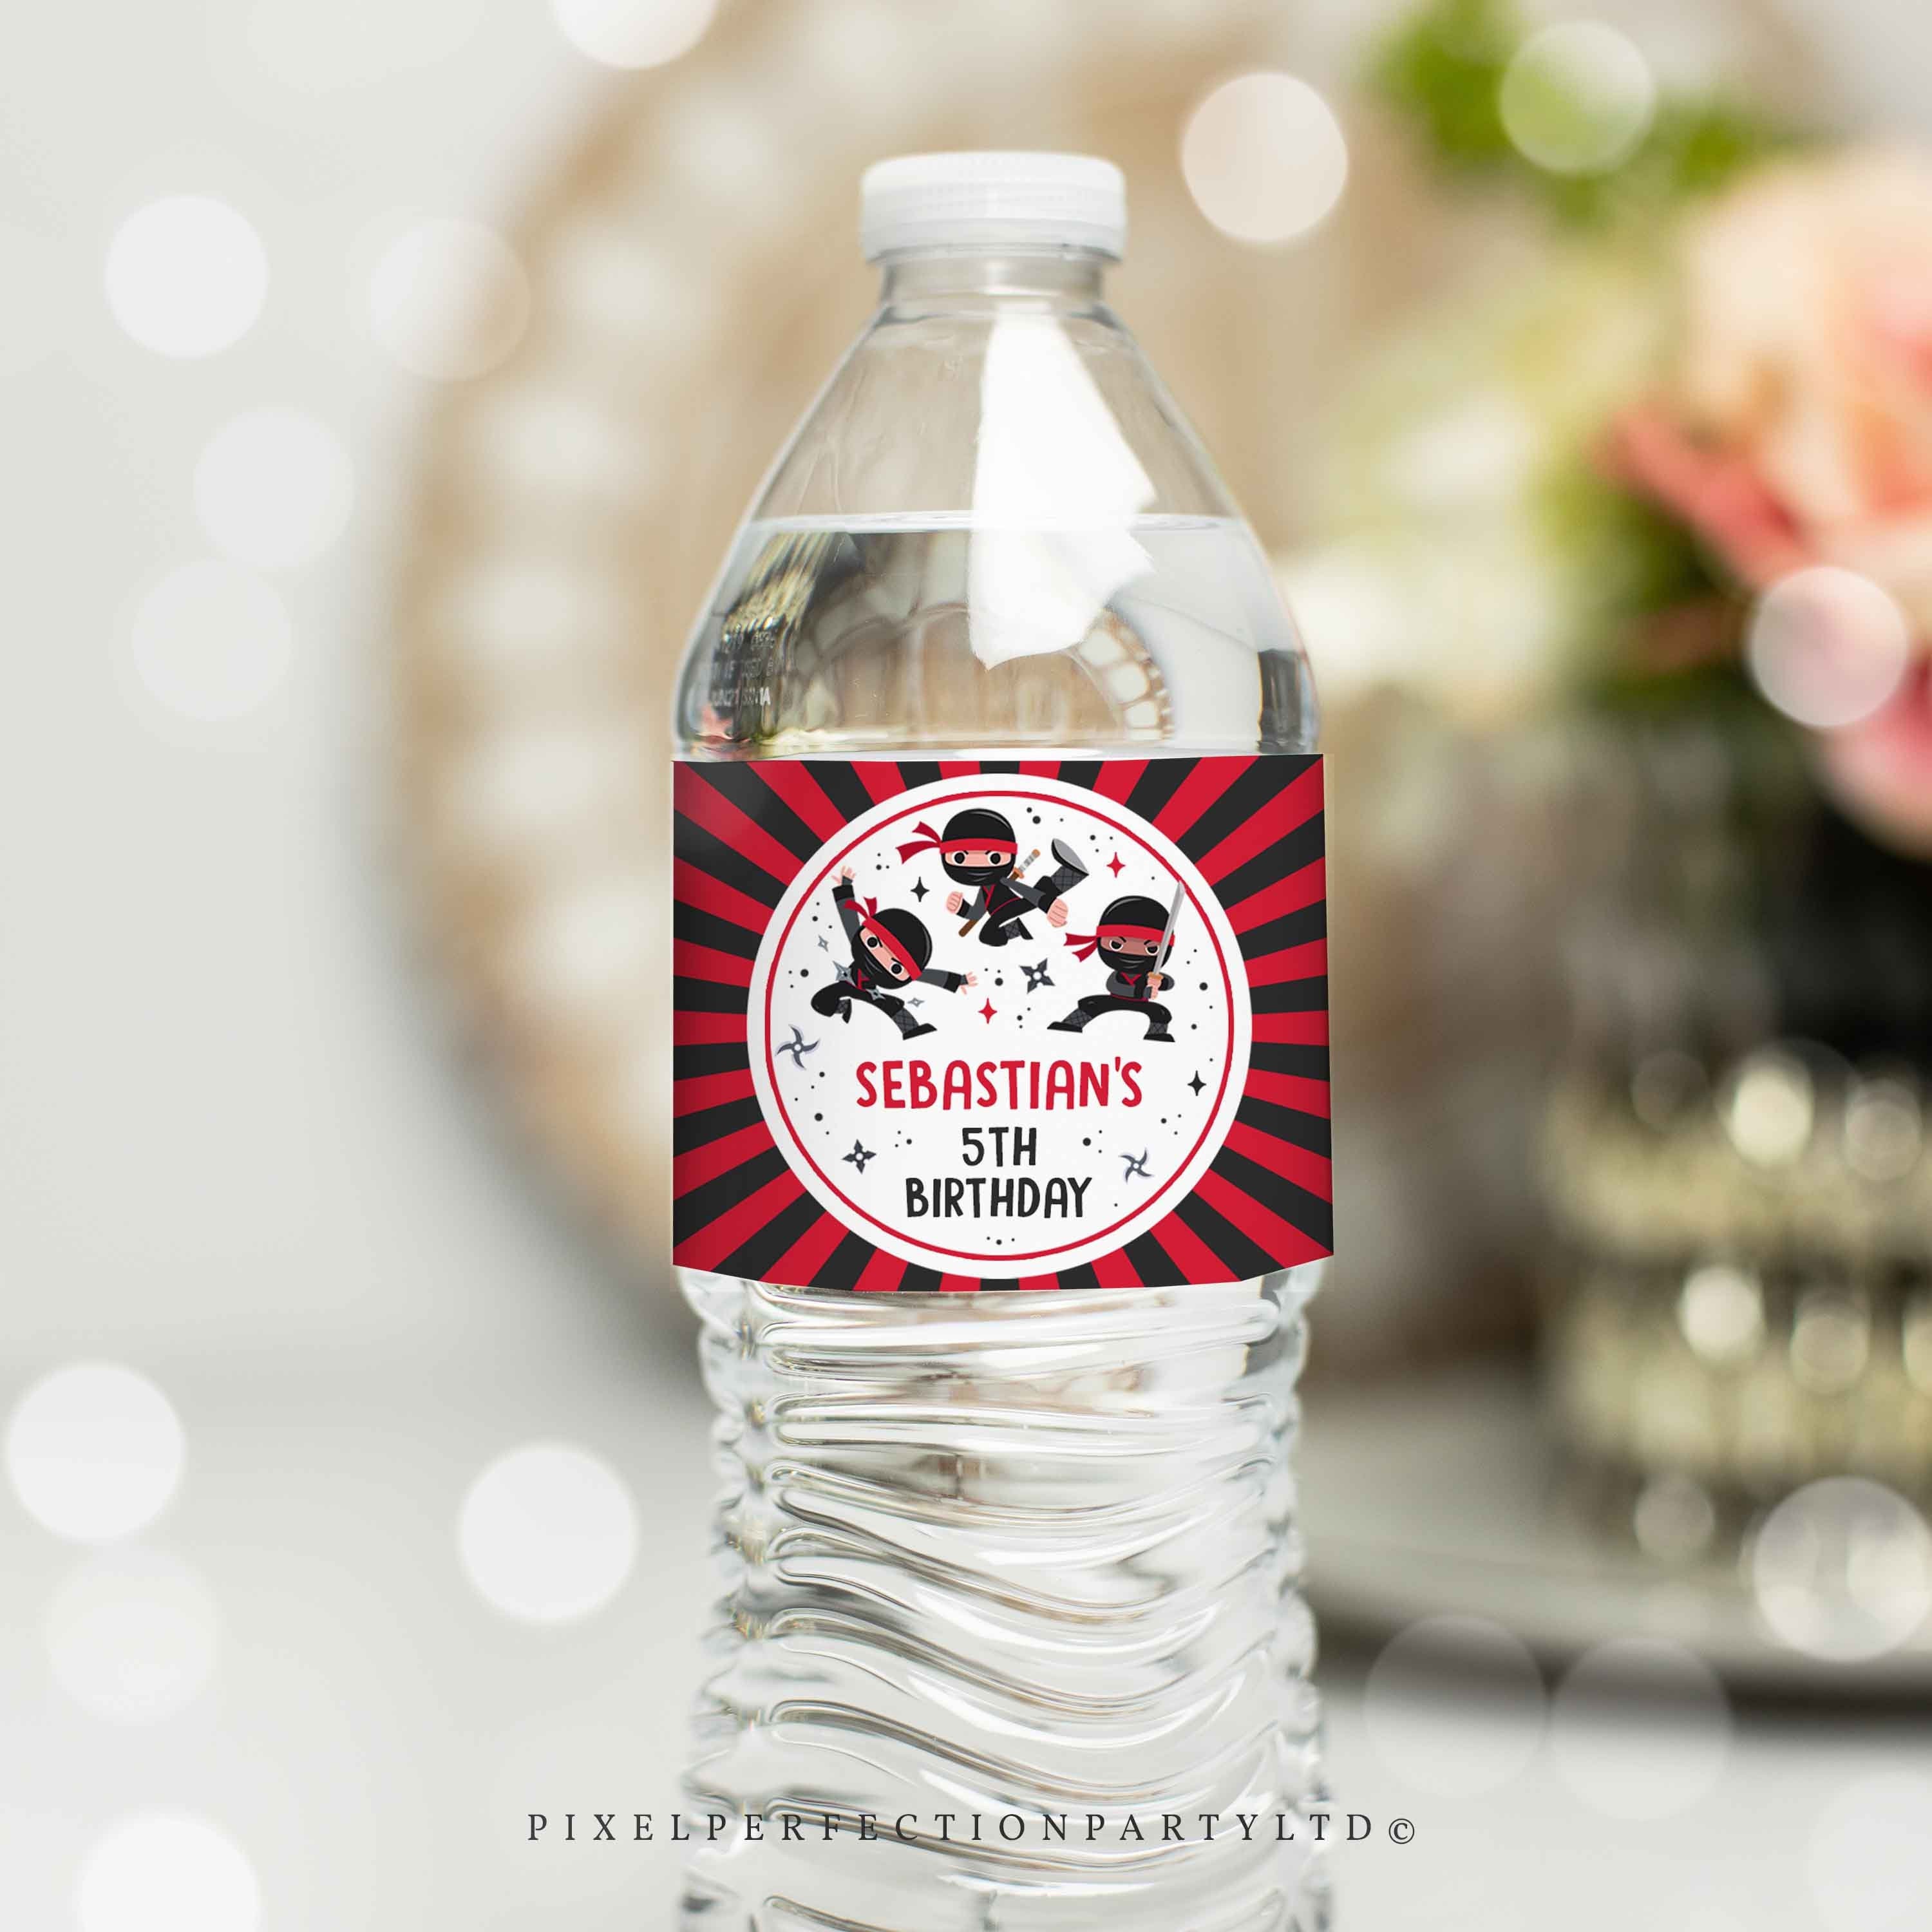 Ninja Water Bottle Labels Martial Arts Water Bottle Labels Ninja Birthday  Party Instant Download by Busy bee's Happenings